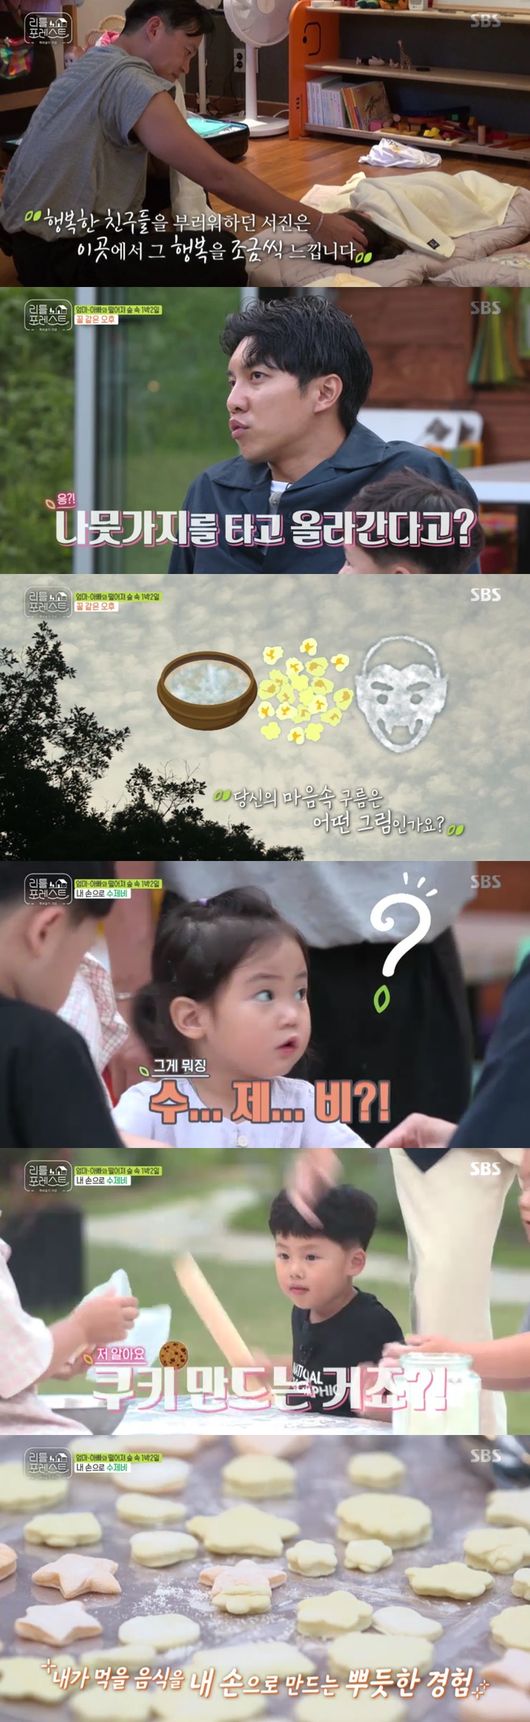 With the new Littles joining, the triangular relationship of the three Littles was created and added fun to the broadcast.The new Little Lees joined the SBS entertainment Little Forest broadcast on the 3rd.Lee Seung-gi enjoyed a break in the yard with Lee Han-i and Jung Han-i.Lee Seung-gi asked what the children thought of looking at the sky, and Jung Han said, The clouds are likely to taste popcorn. Lee Han-i exploded his creativity and smiled, saying, Dracula shape.The next day, Jung So-min brought a blueberry tree; Lee Seo-jin prepared an upgraded lunch menu.Jung So-min and Park Na-rae recalled their childhood by preparing a surprise treasure hunt for their children, hiding the treasure; they wondered who would find the treasure.At this time, a new Little from Busan arrived, Ye Jun-i, and Lee Seo-jin, who was alone in the kitchen, first met with the new Little Lee.Ye Jun was awkward for a while and laughed at the explosion of curiosity.Park Na-rae also came to greet Yejun, but Yejun was not interested; Park Na-rae attracted attention to the dinosaur of conversion as a weapon, and finally succeeded in attracting Yejuns attention.When Jung So-min, an affinity fairy, appeared, Ye Jun-yi grabbed his hand and exploded concentrically where the rabbit was.The new Friend arrived. It was his eldest sister, Gaon. Gaon laughed at the camera, curious.I want to be close to nature, Lee Seung-gi reassured, Let me.In the meantime, he said, Seojin has a child to concentrate on rather than Brooke. Lee Seo-jin smiled, It is the most beautiful time to eat well from the standpoint of eating, and it is fun to see.Other children arrived, and they greeted the new friends. Gaon approached Grace with a friendly English name.As the eldest sister, she actively approached her younger sisters and took care of them. Jung So-min and Lee Seung-gi together released the childrens awkwardness with monster play.Ihan approached Gaon, and the look of his name was agitated as he gave it to him.Lee began to attract attention by playing with Gaon, who draws a pretty picture, so the two little people became close to each other.Lee, who hates Cuttlefish, said that Gaon likes Cuttlefish and changed his attitude, saying, I will eat Cuttlefish.The carers looked cute, saying, Lee Han went to Gaon in Brook, and I was in love. At this time, Brooke appeared, and the triangle of the three little girls who fell alone was interesting.Little Forest broadcast screen capture